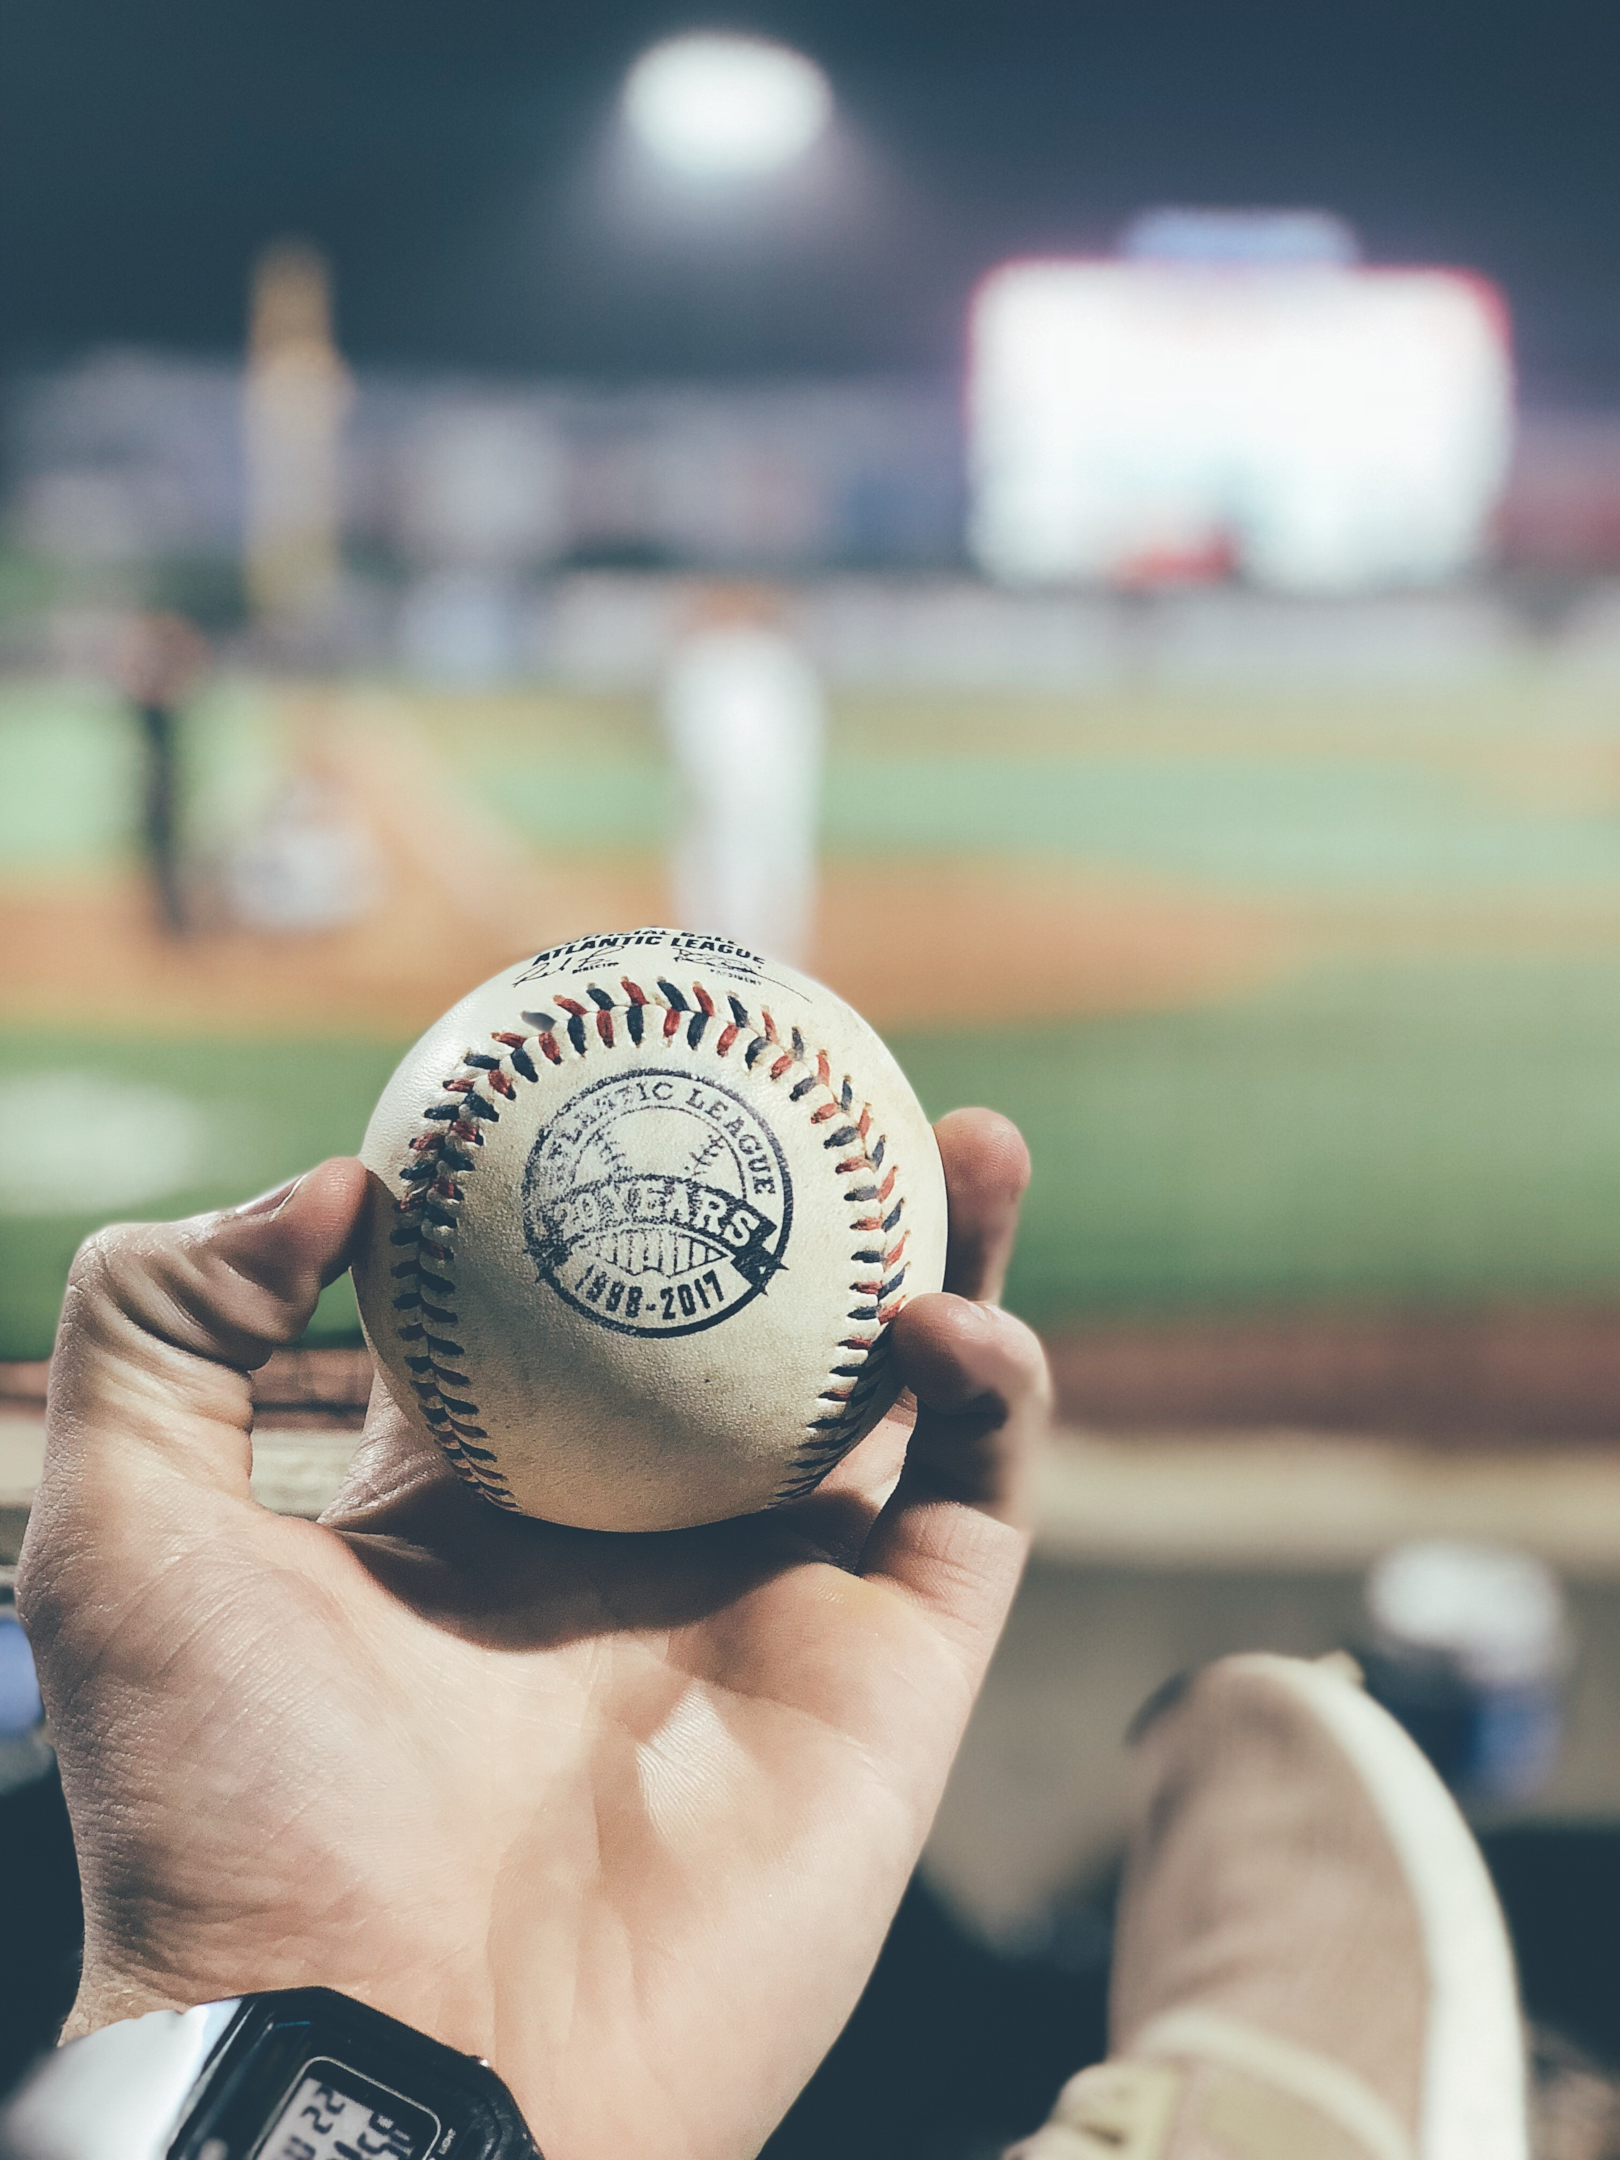 A fan catching a foul ball at an Minor League game